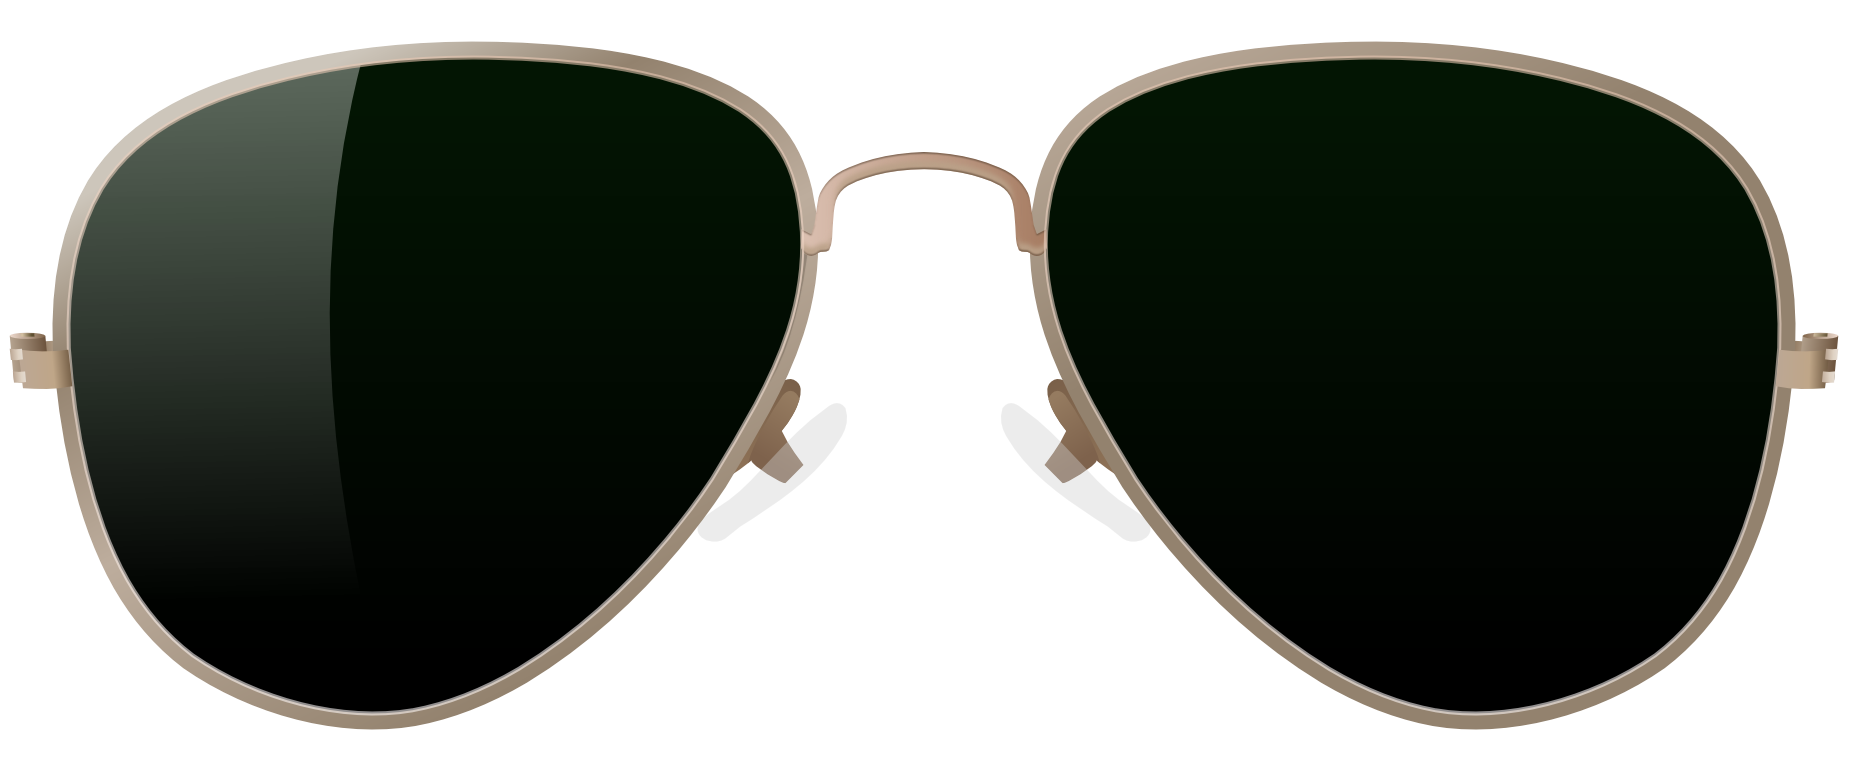 Sunglasses Free Download Png PNG Image